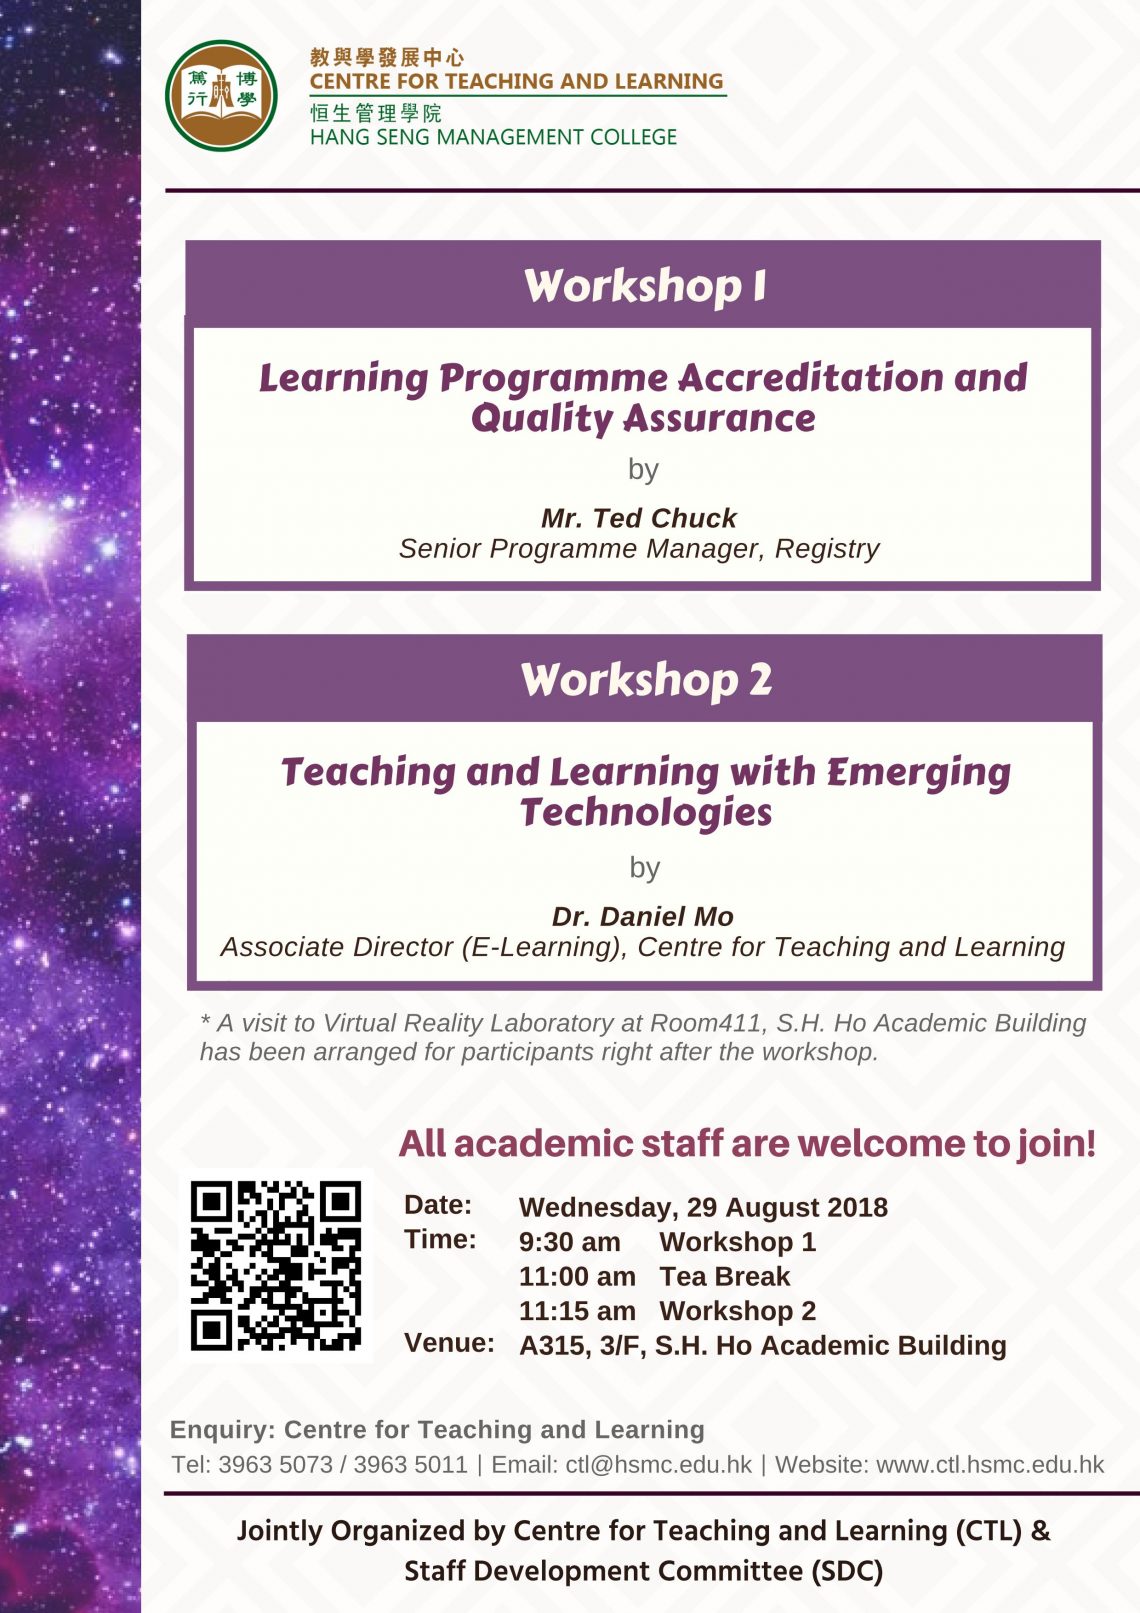 Workshop I - Learning Programme Accreditation and Quality Assurance & Workshop 2 - Teaching and Learning with Emerging Technologies